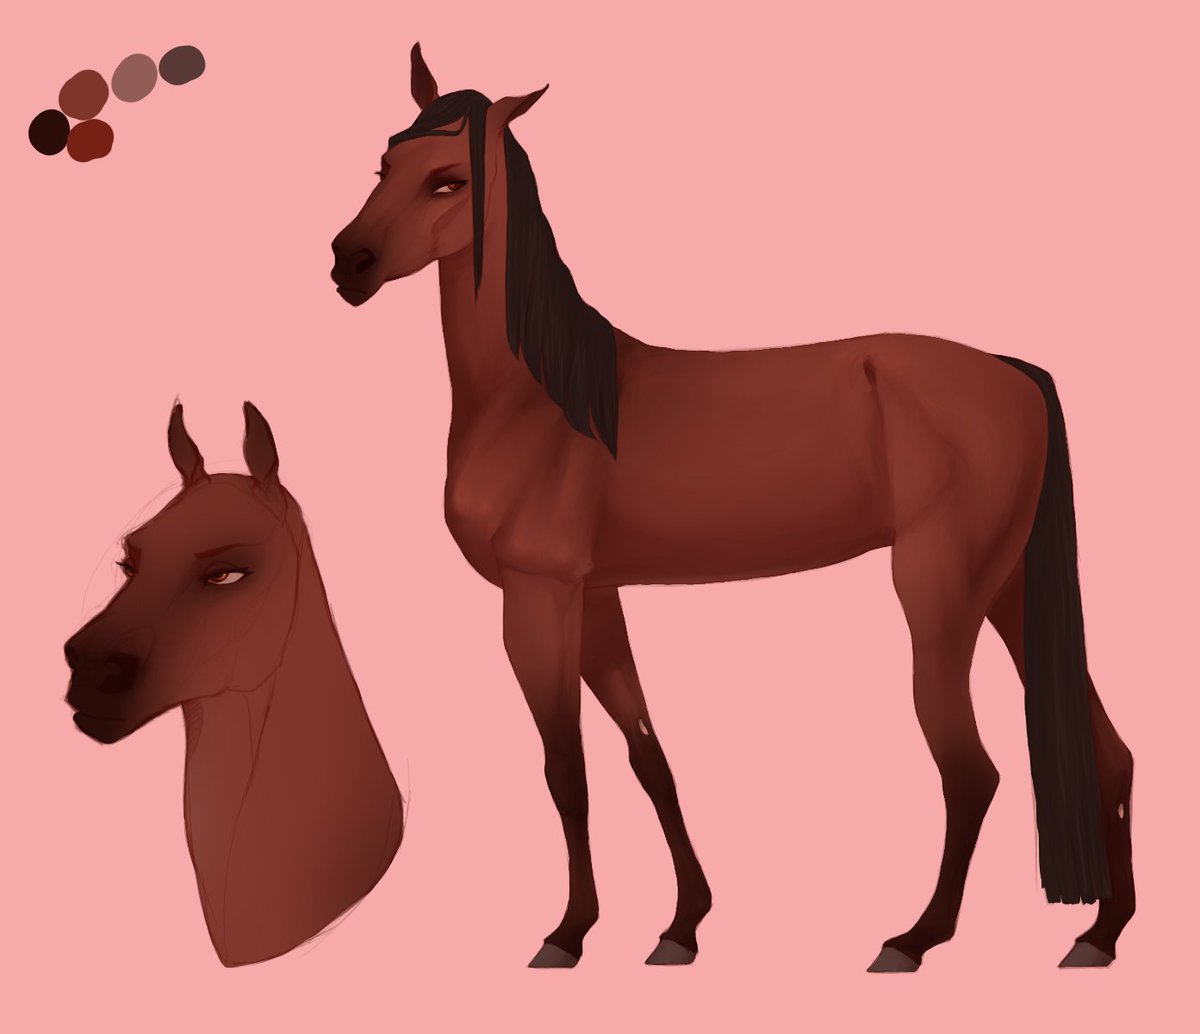 ref sheet tester with an unfinished palette WEEEEE
#art #sketch #horse #equine #equineart